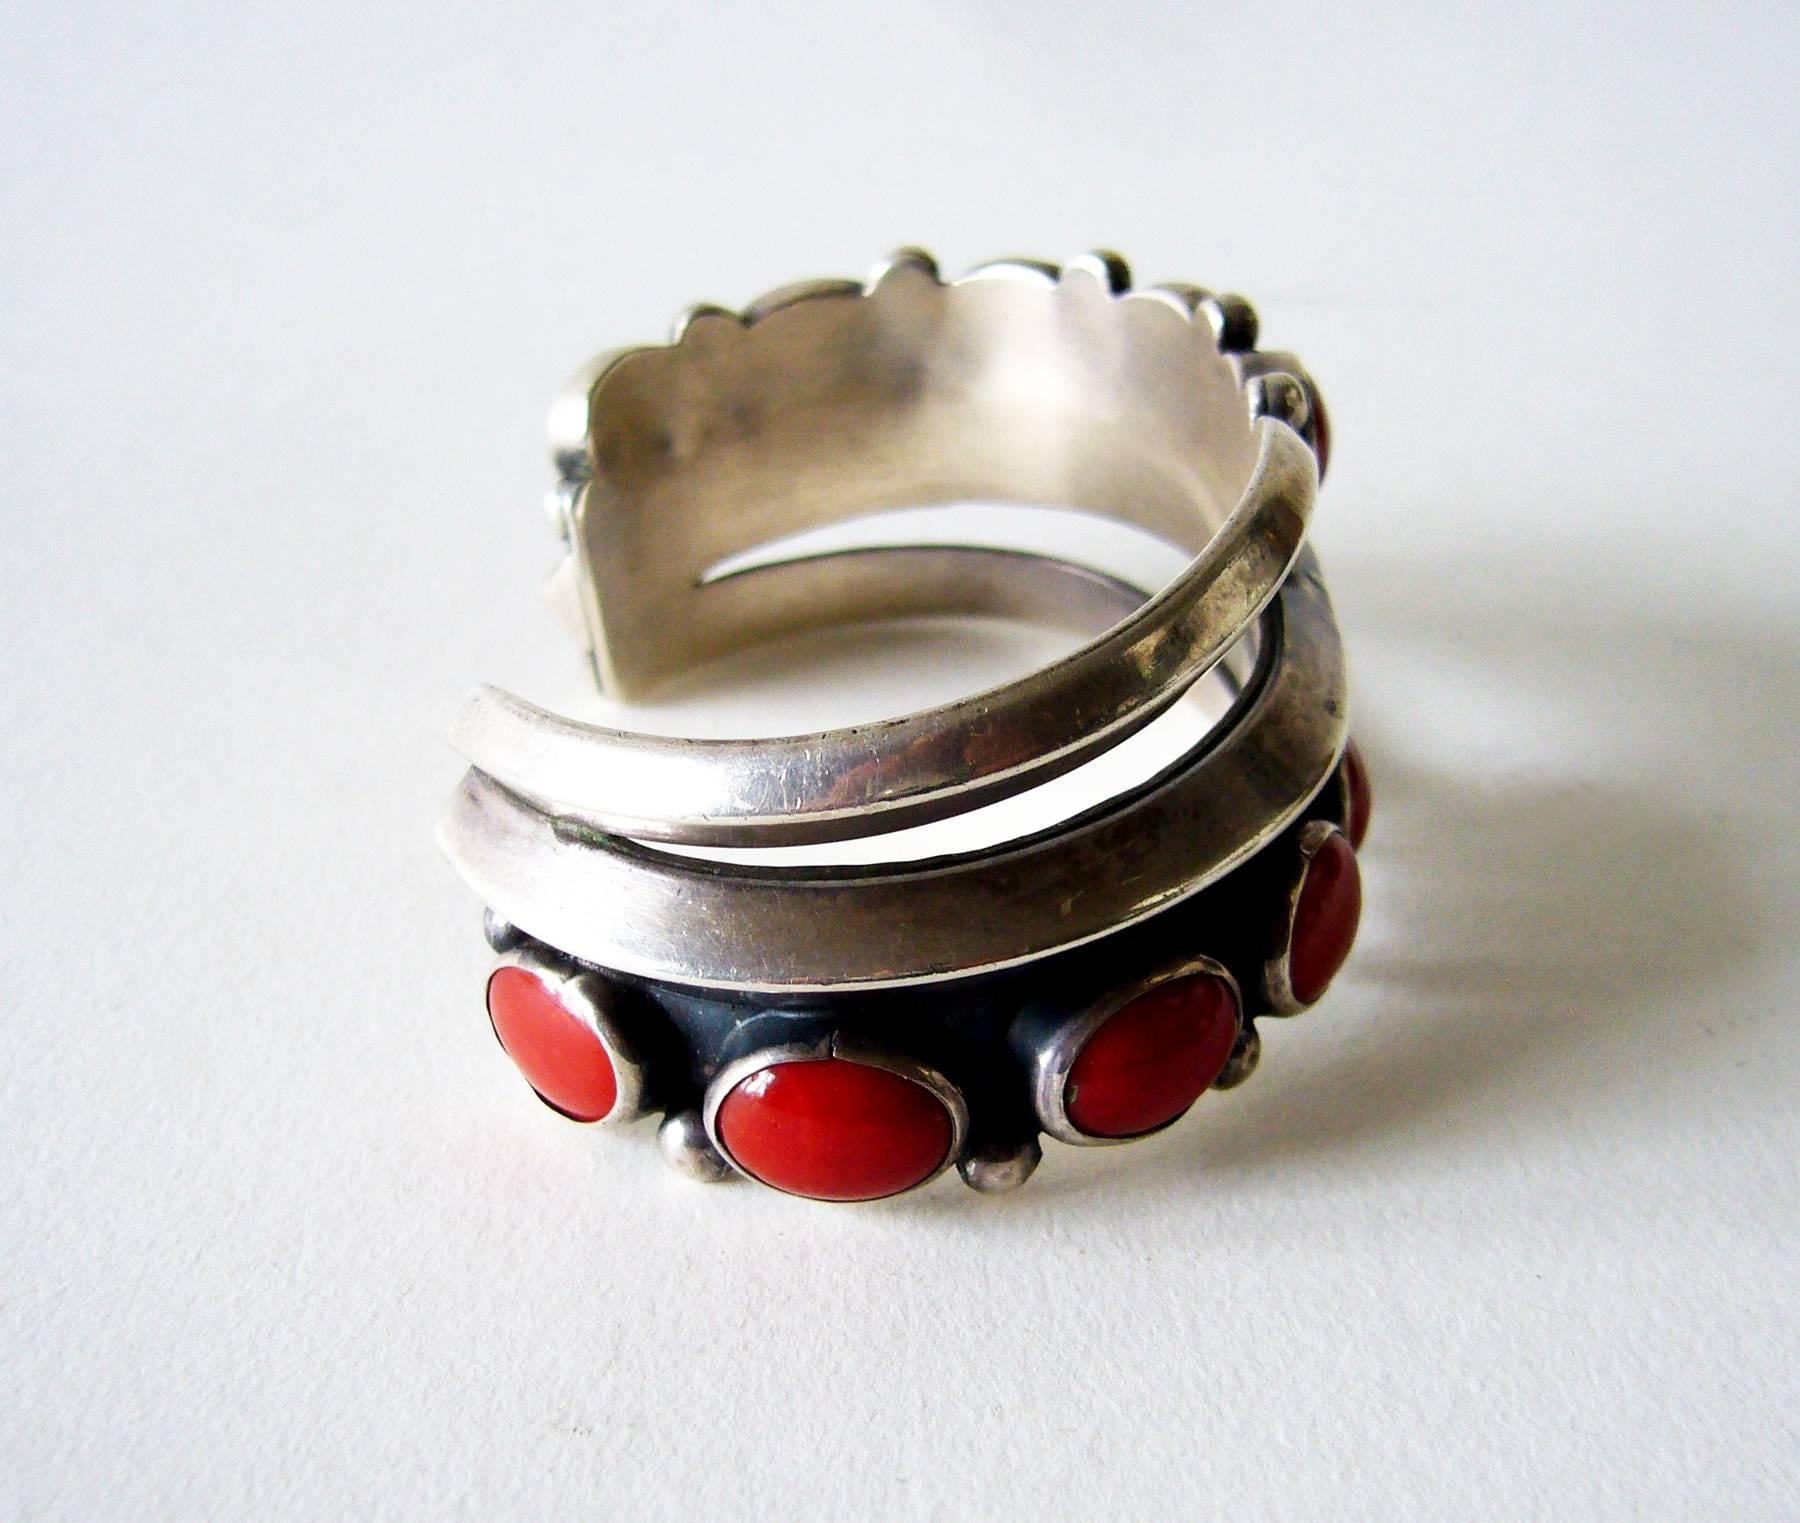 Navajo red coral and sterling silver cuff bracelet circa 1970's.  Bracelet measures 5.25